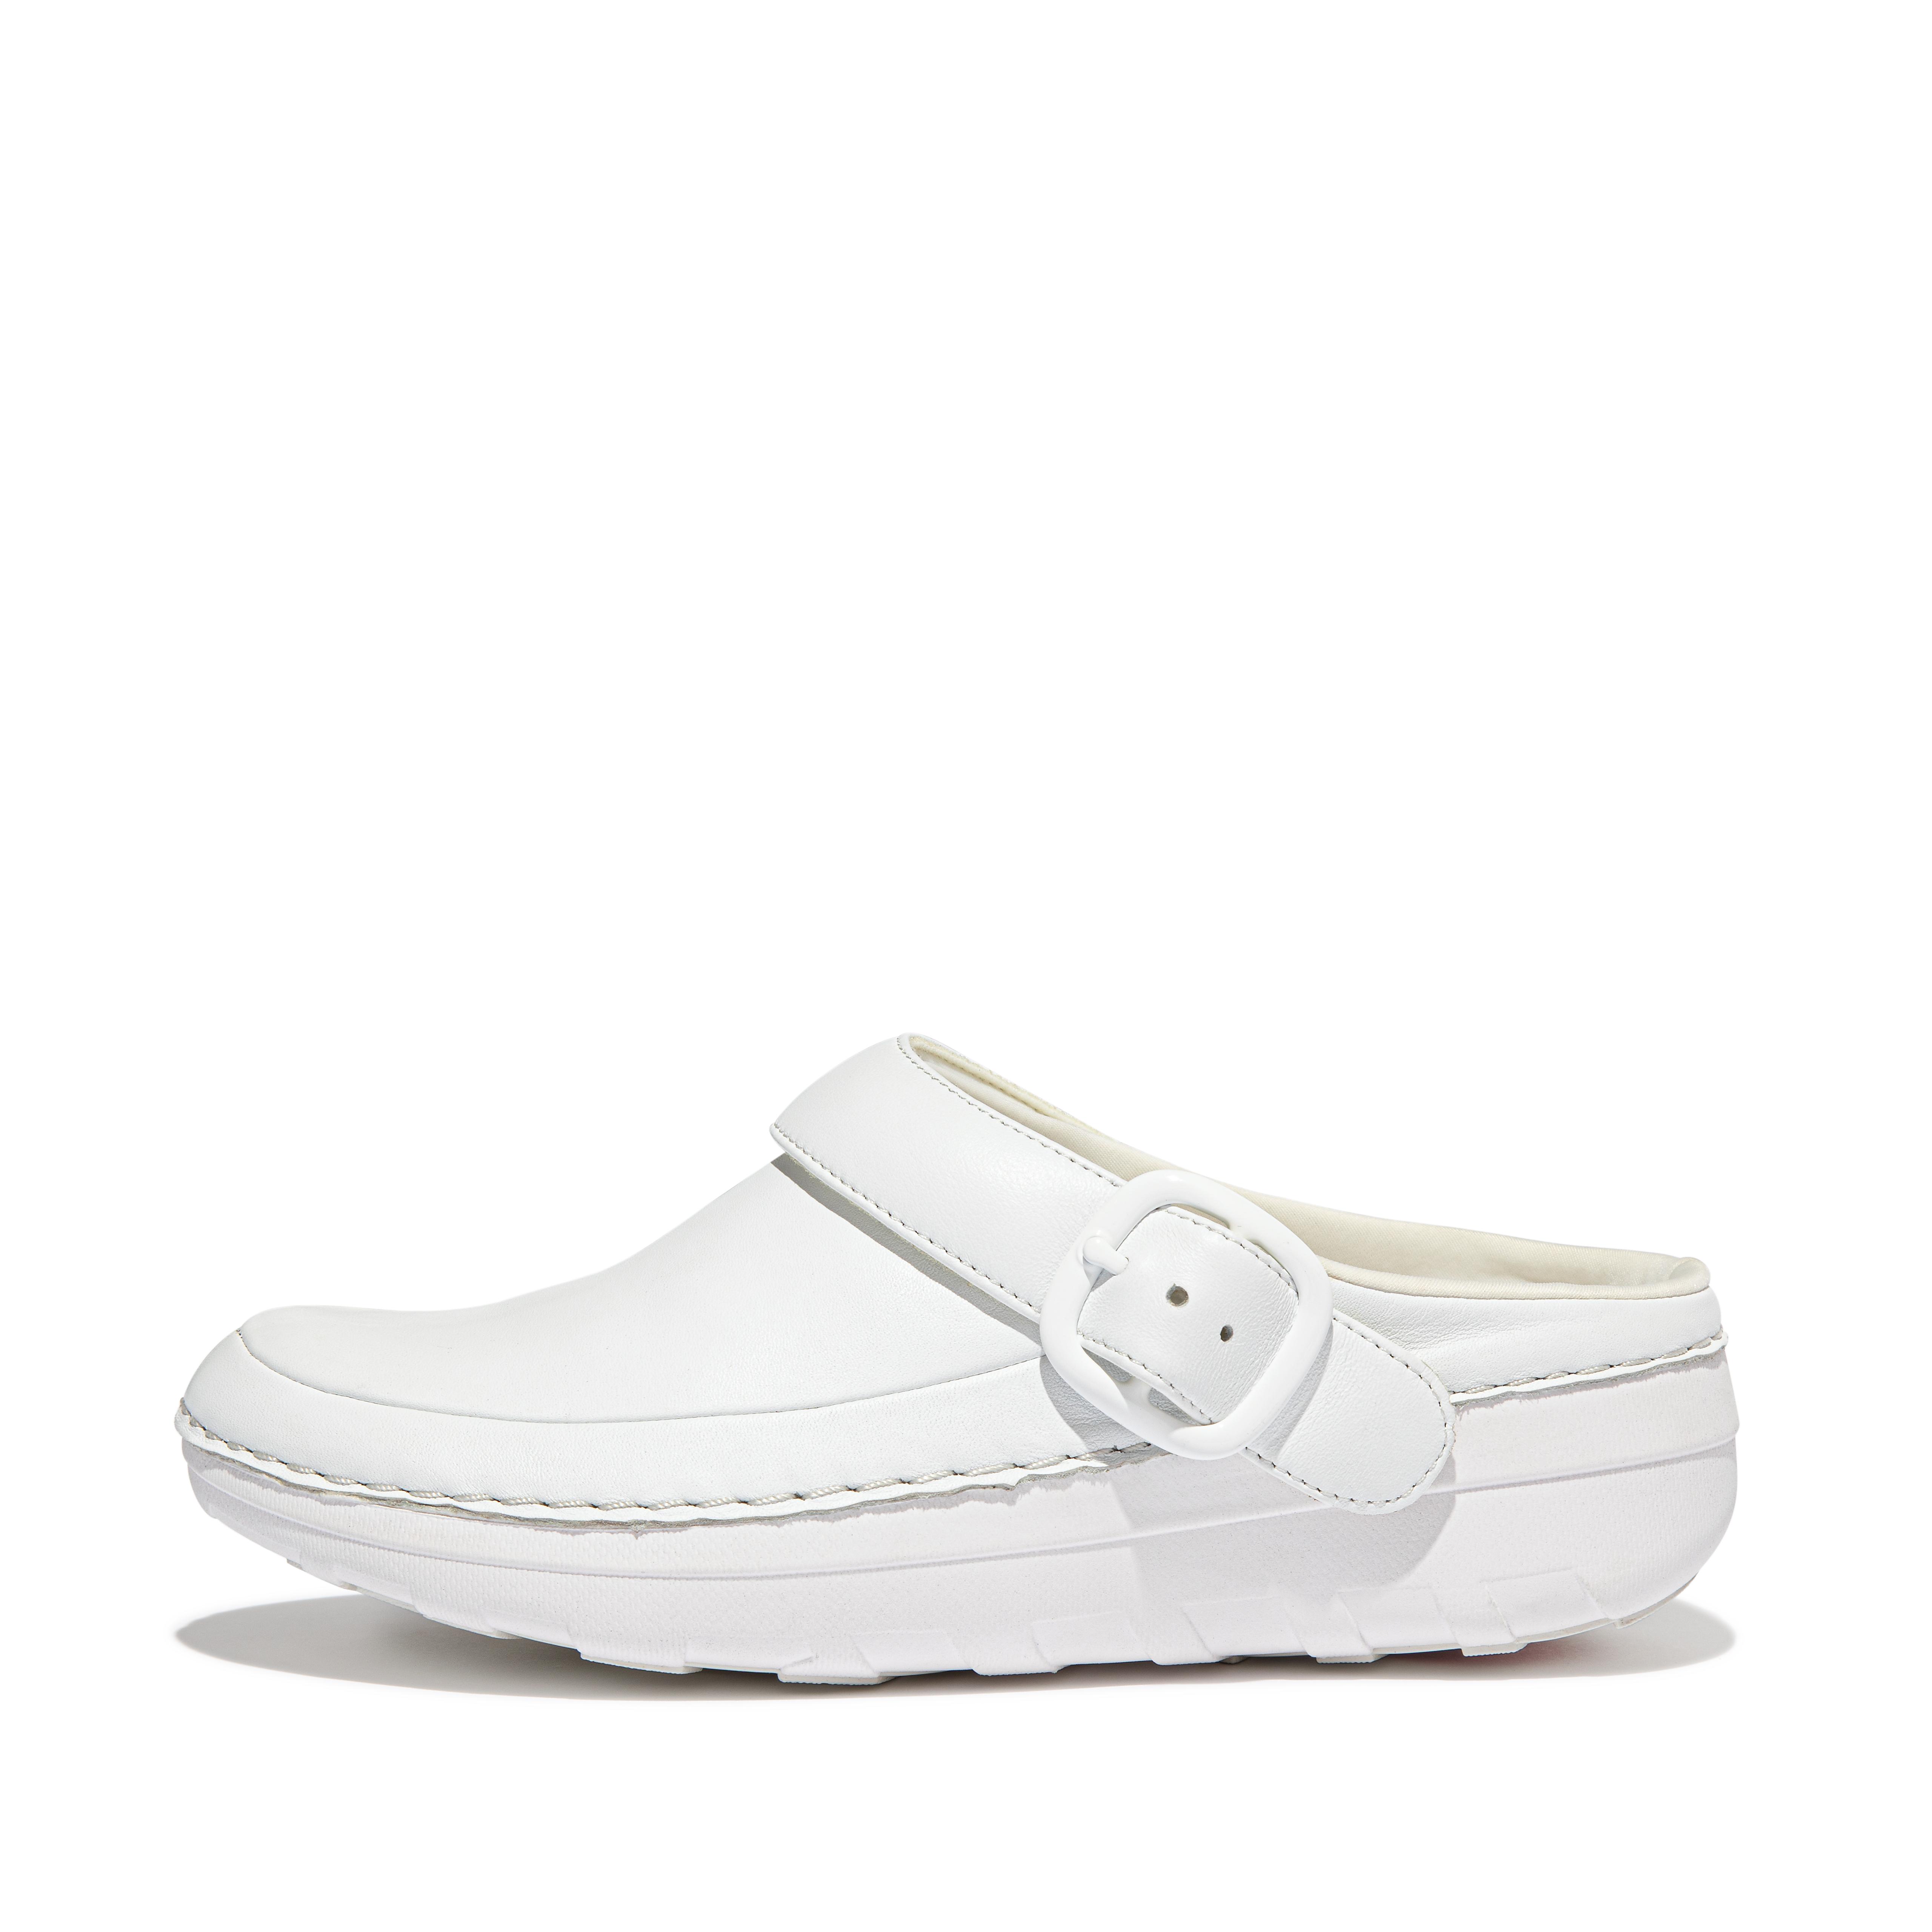 Fitflop Superlight Leather Clogs